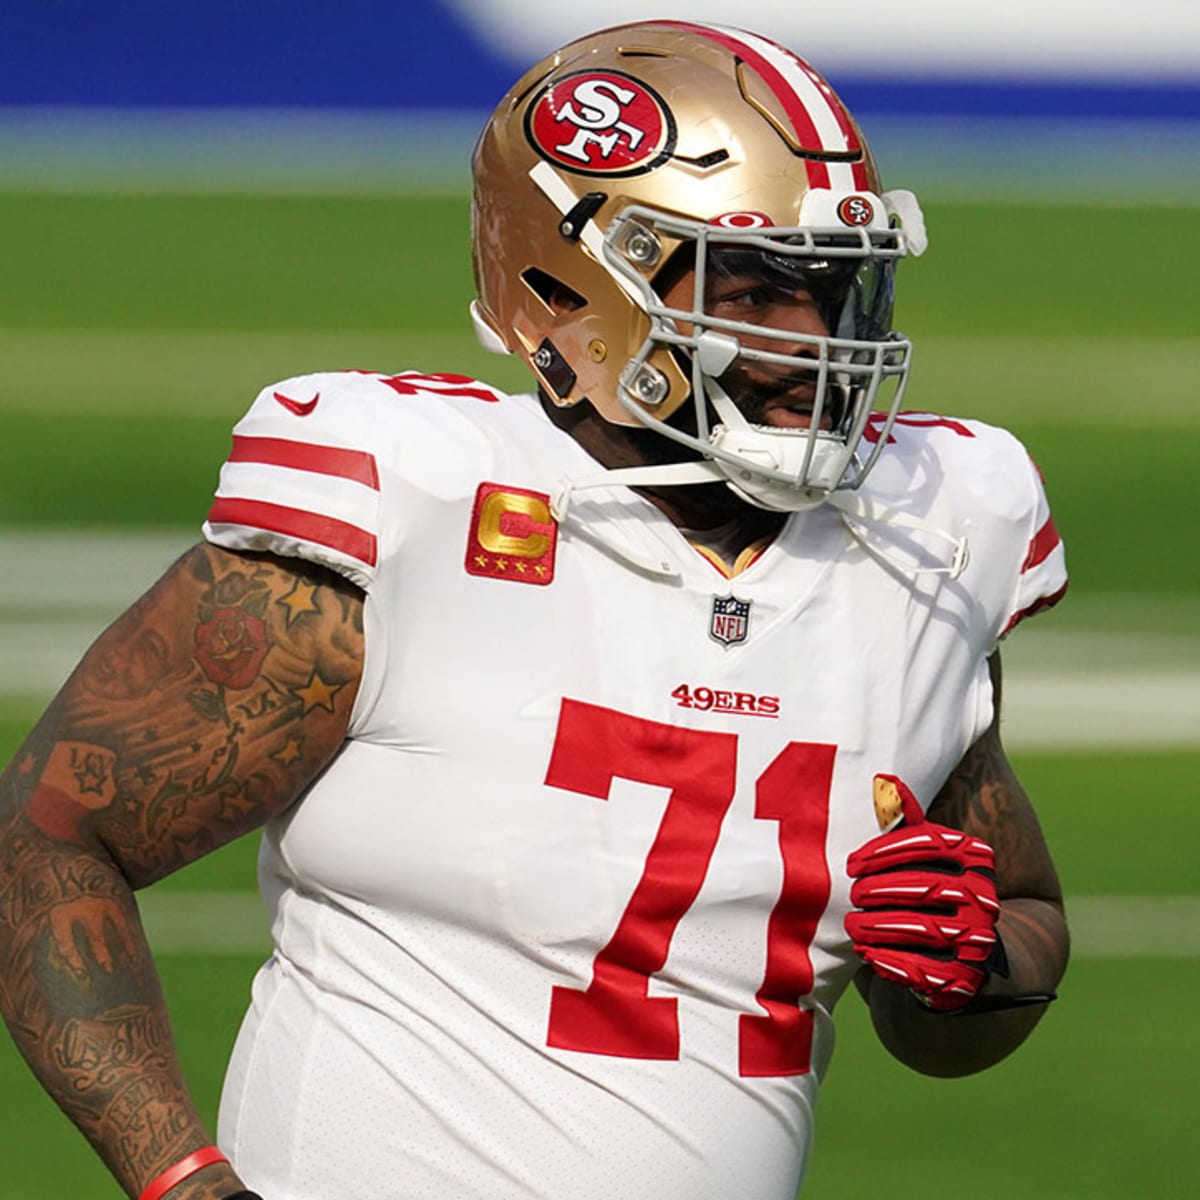 49ers Offensive Lineman Roasted the Steelers With Such a Subtle Humblebrag  - Sports Illustrated